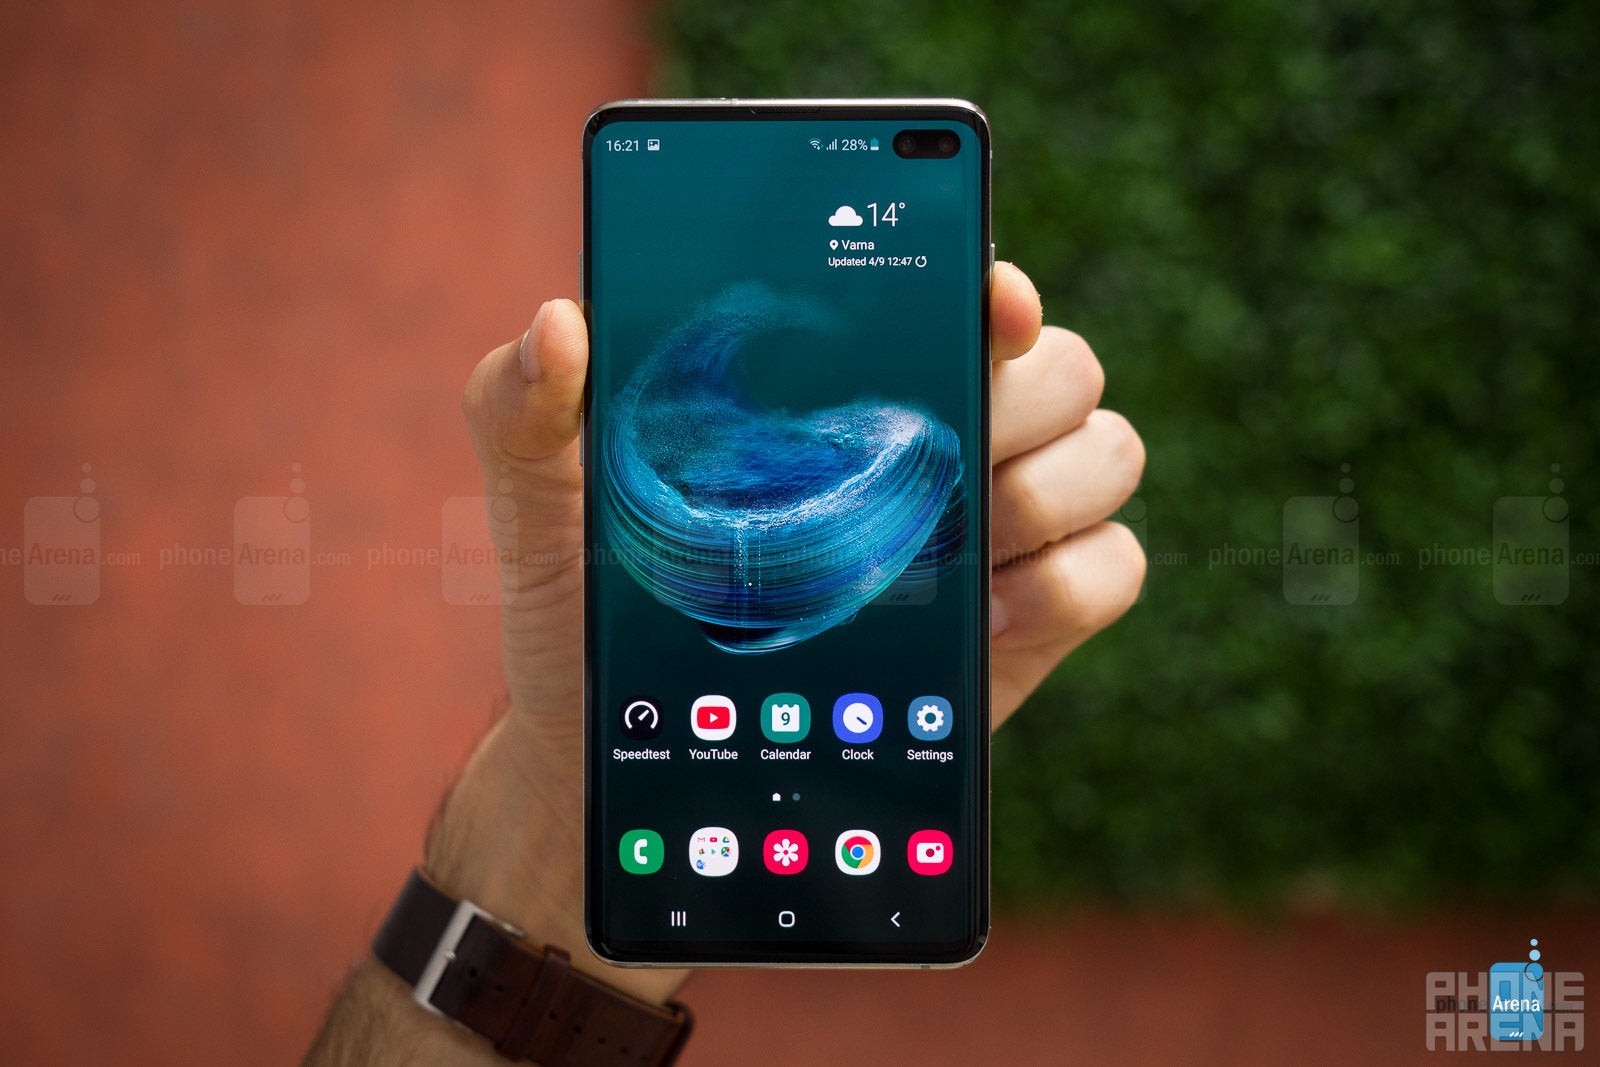 Samsung Galaxy S10, S10e and S10 Plus: how to take a screenshot